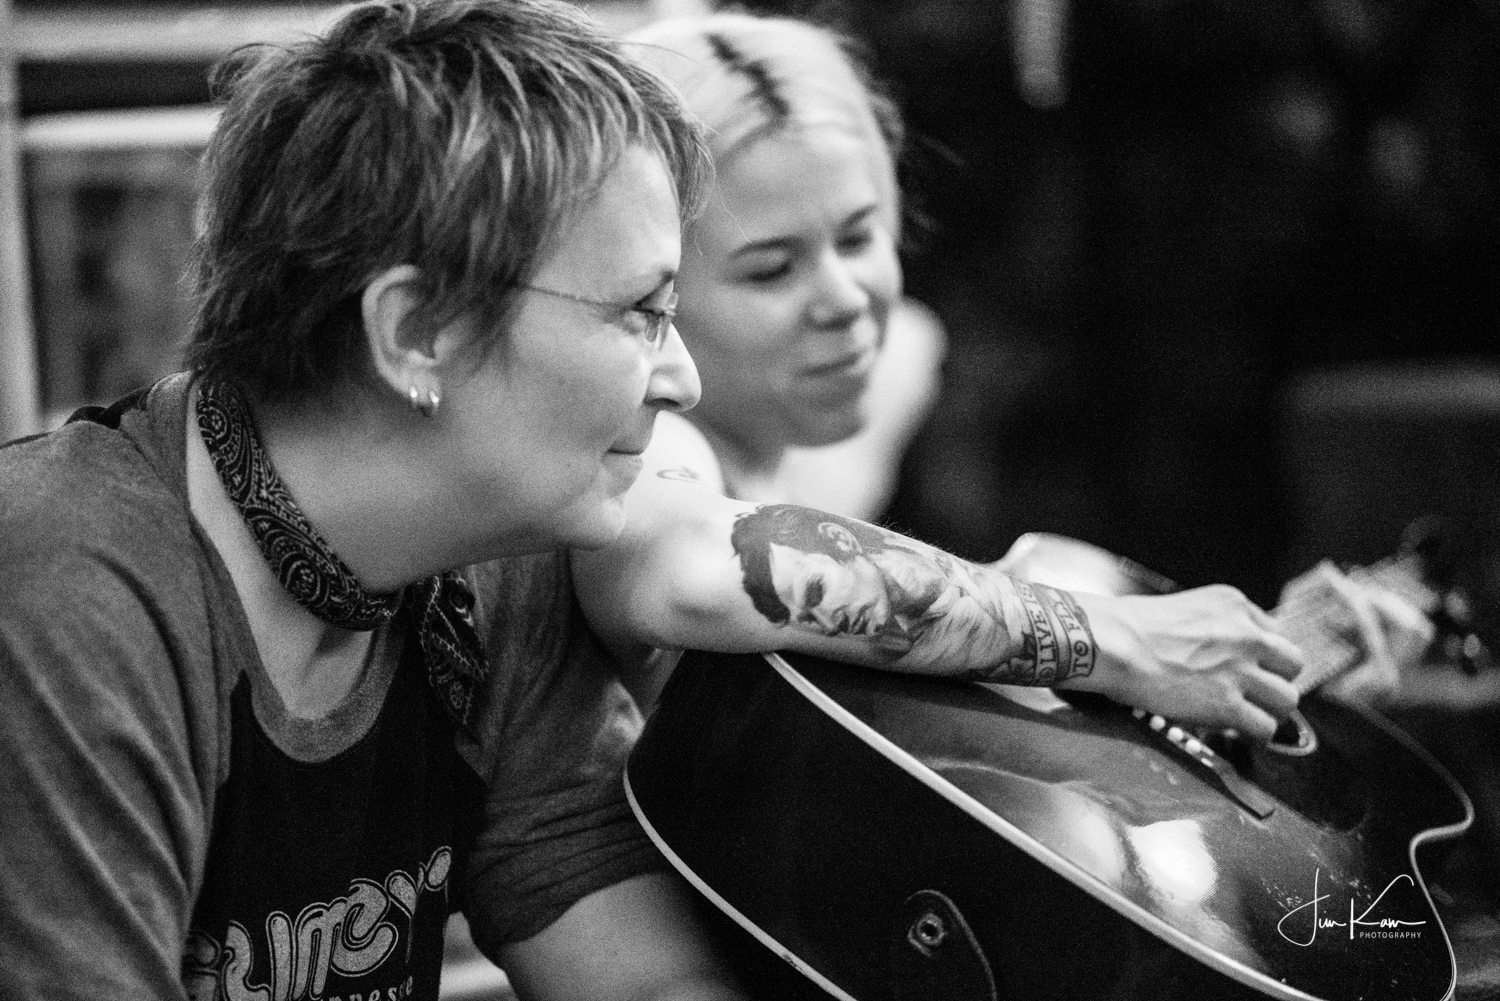  Mary Gauthier &amp; Jaimee Harris. Both performed on the MainStage this year. Mary is a veteran performer and writer. Jaimee was recently named Austin360 artist of the month by the Austin American Statesman. 